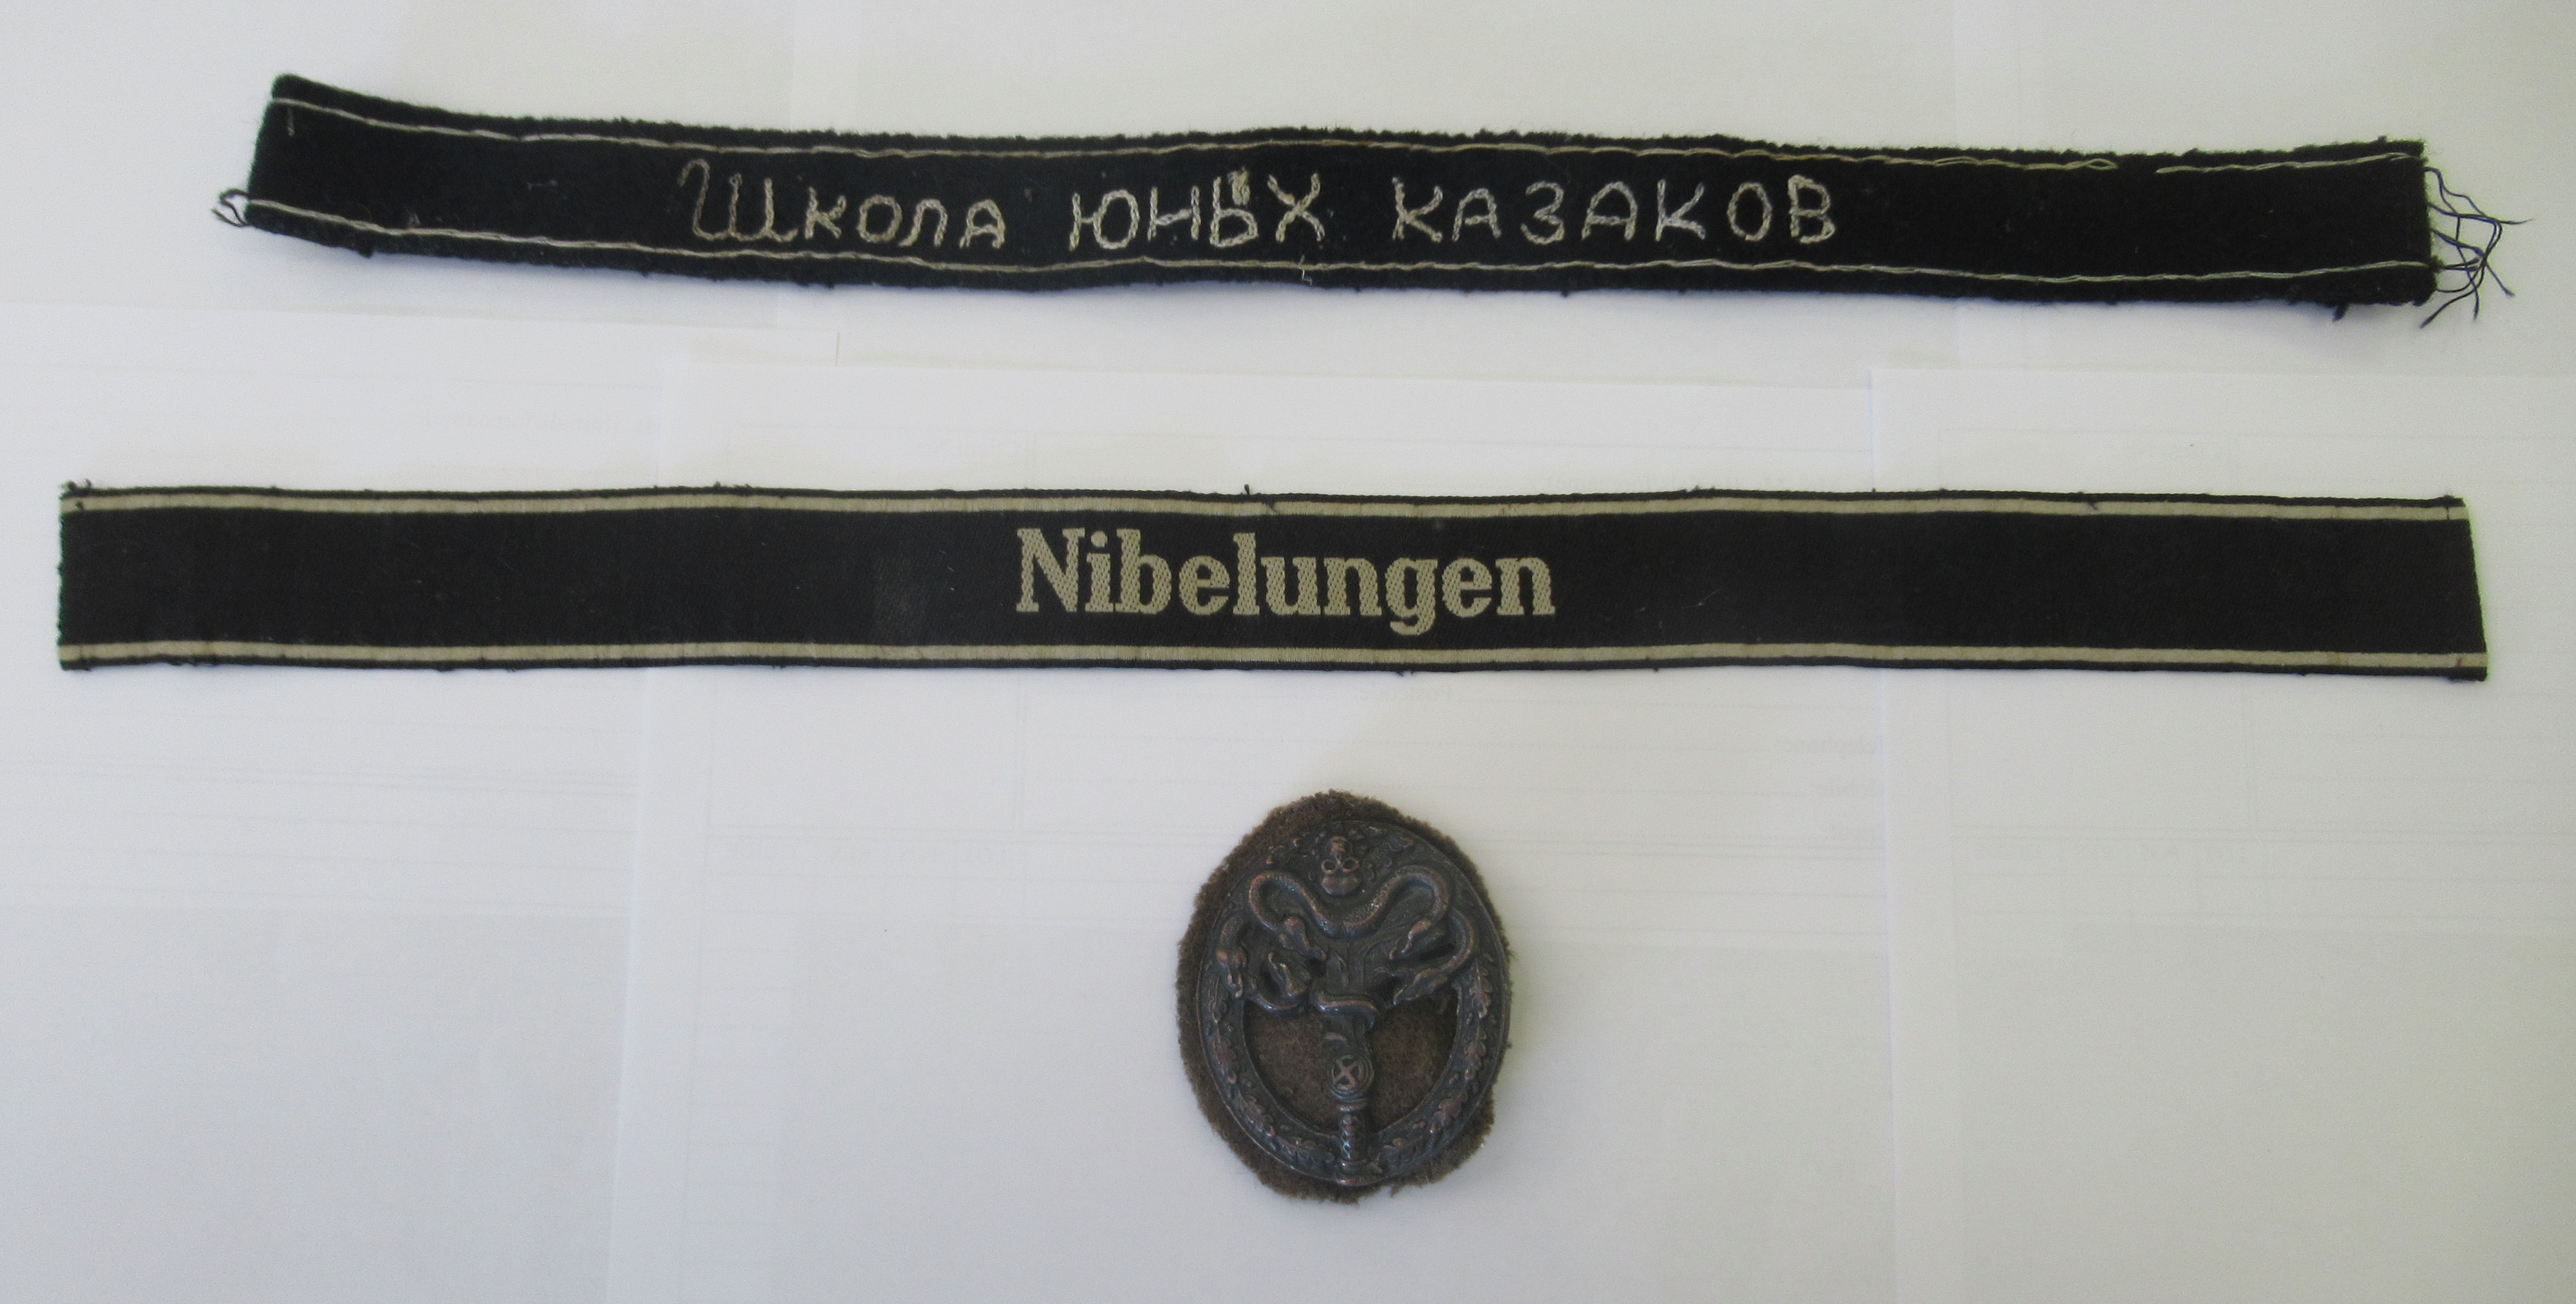 Two embroidered cuff titles (Wkona 10HBX K173 AK0B and Nibelinger); and an oval, bronzed brooch,